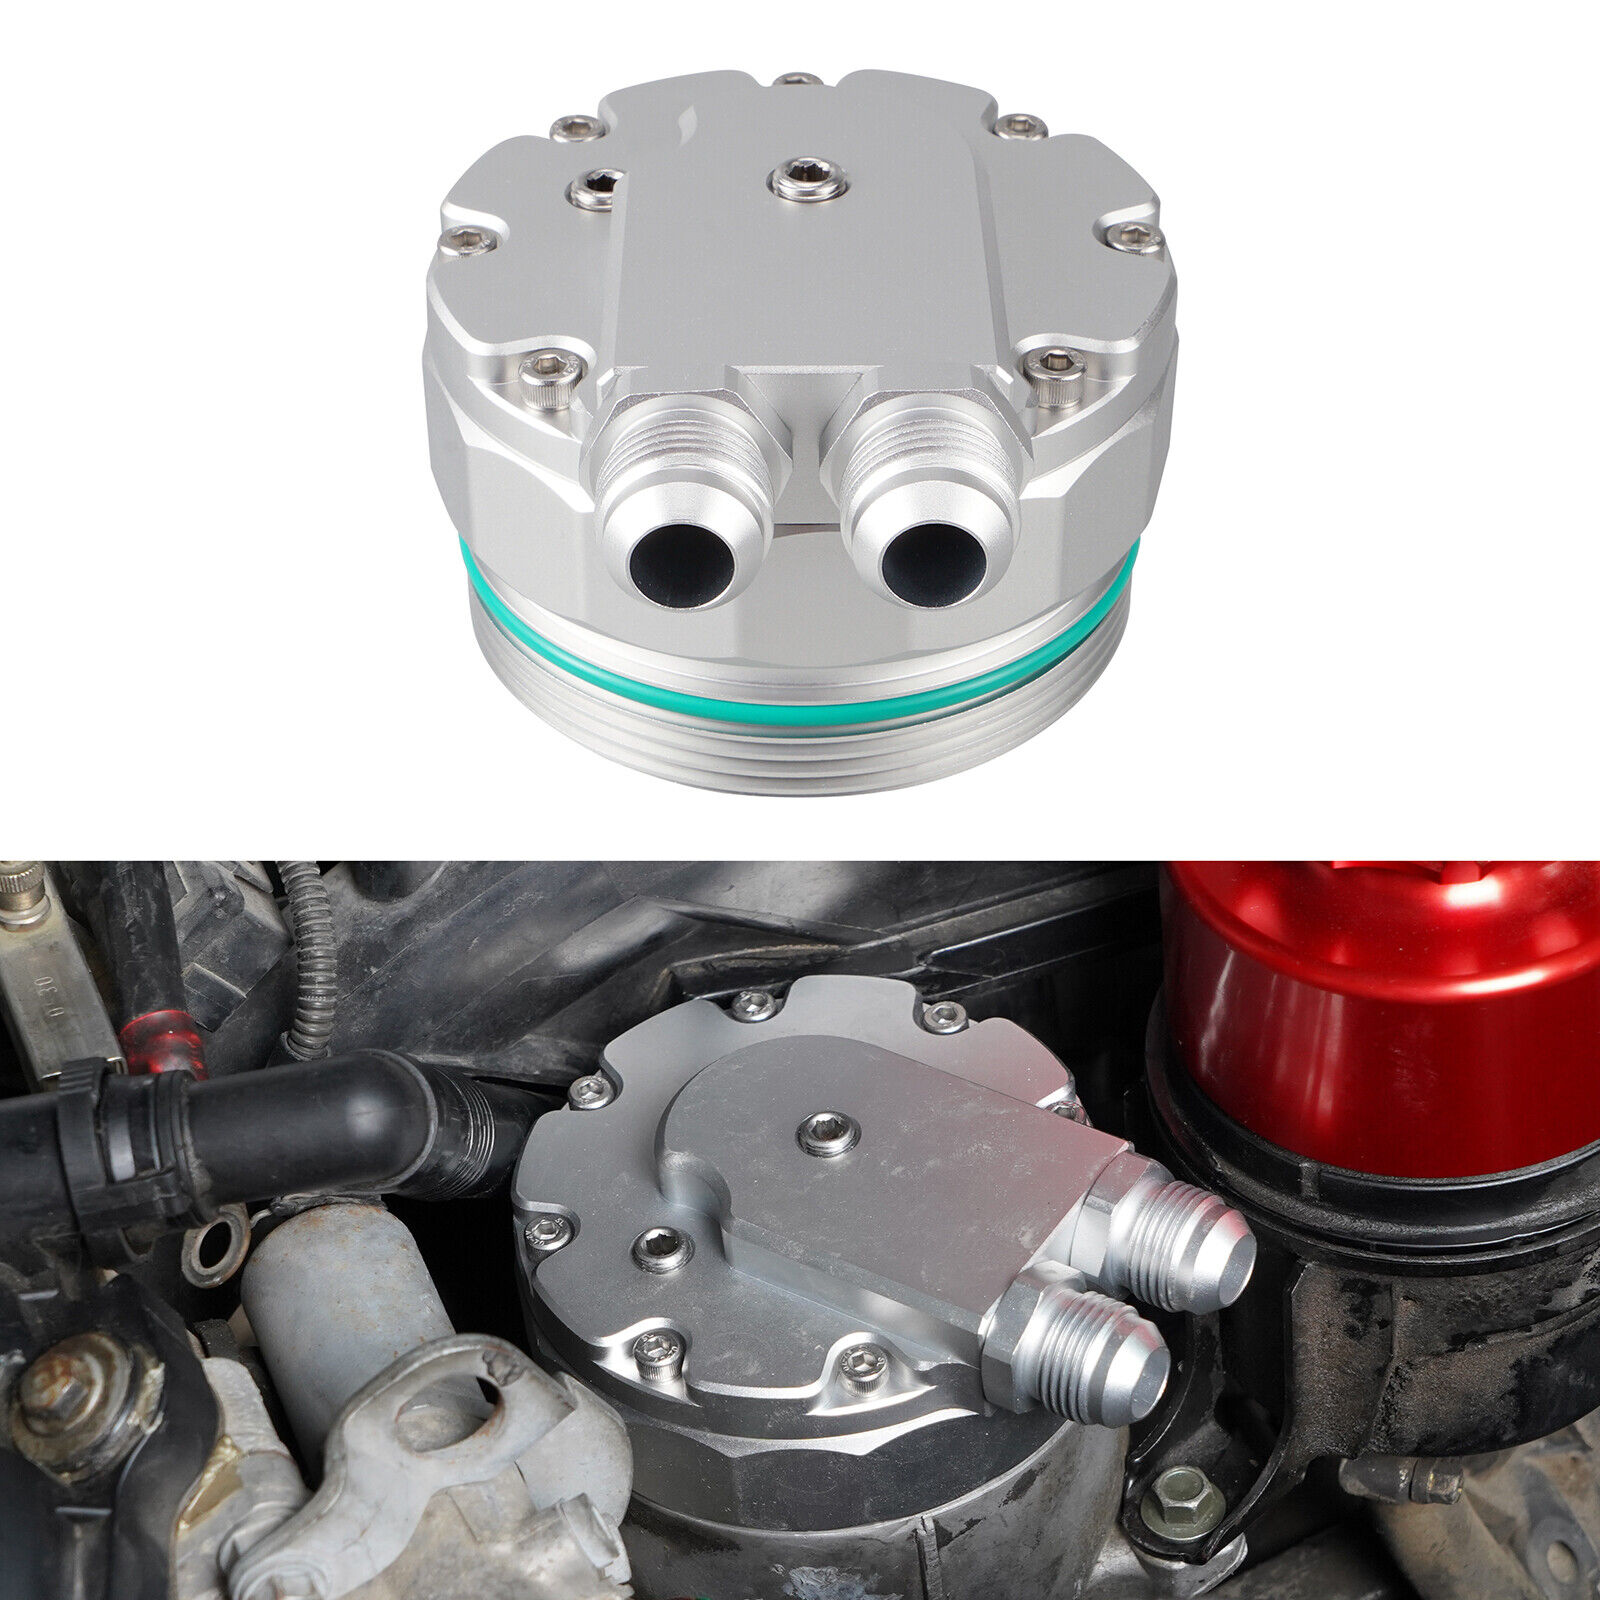 NICECNC For BMW M52 M54 M56 Aluminum Engine Oil Filter Housing Cover Cap Adapter